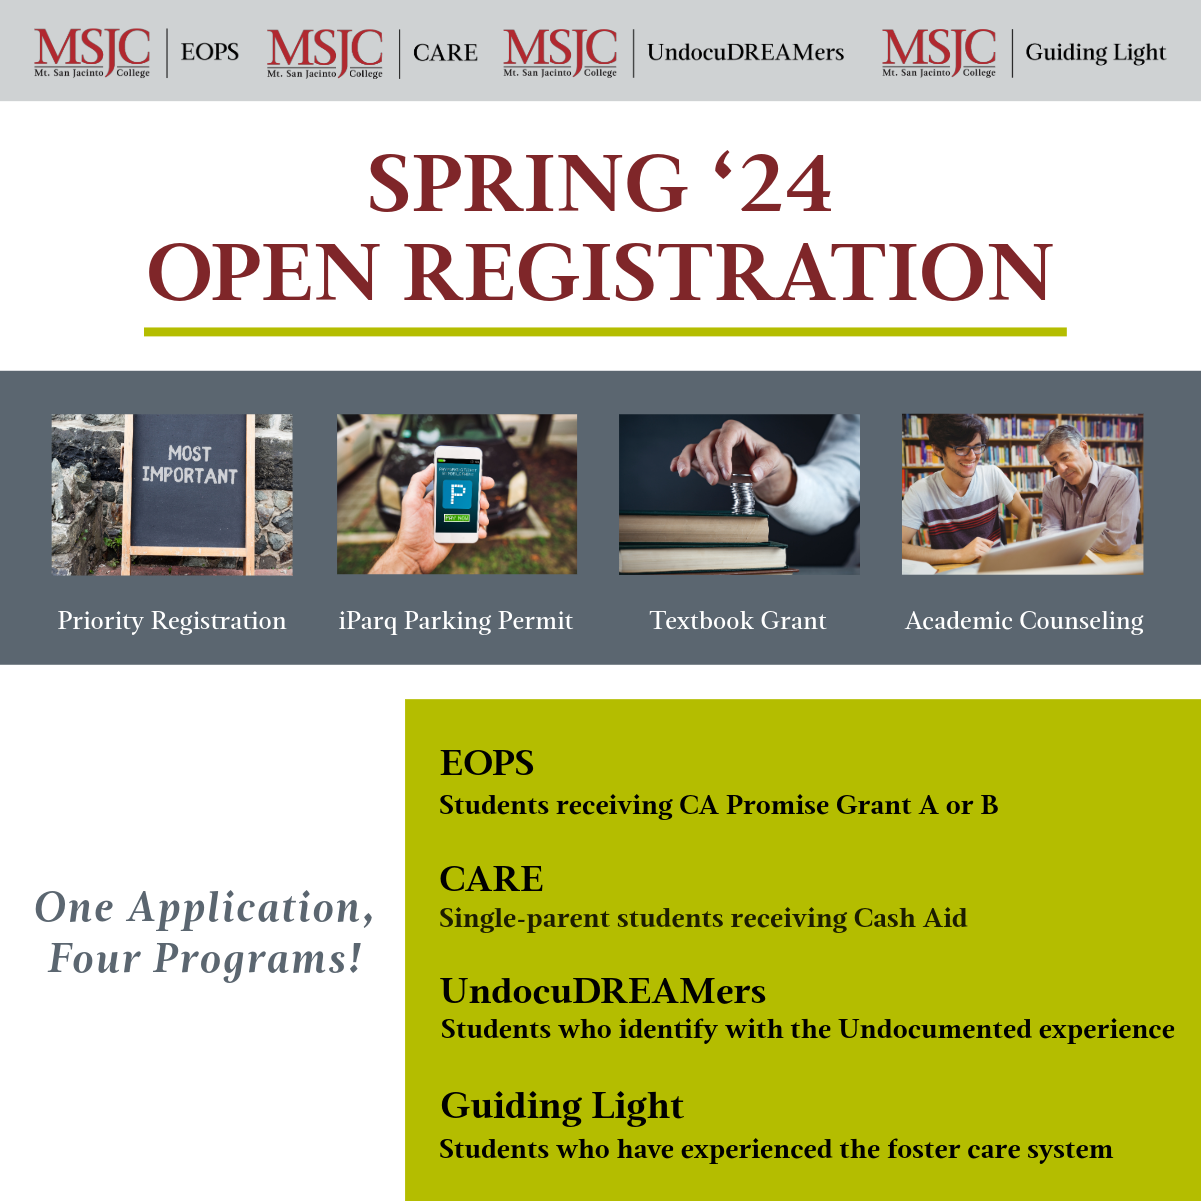 Spring 2024 Open Registration for EOPS CARE UndocuDREAMers and Guiding Light